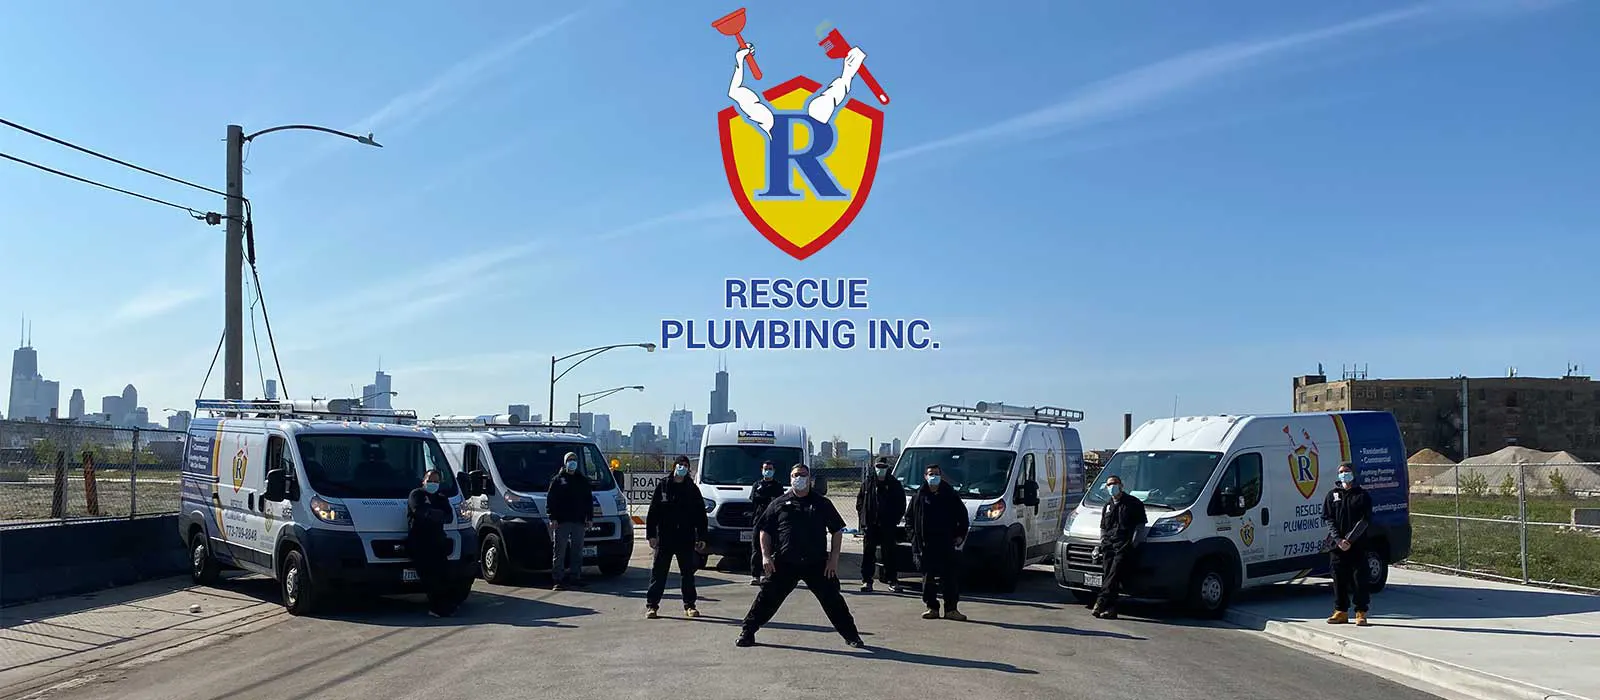 Rescue Plumbing recommends only using professional drain cleaners without chemicals